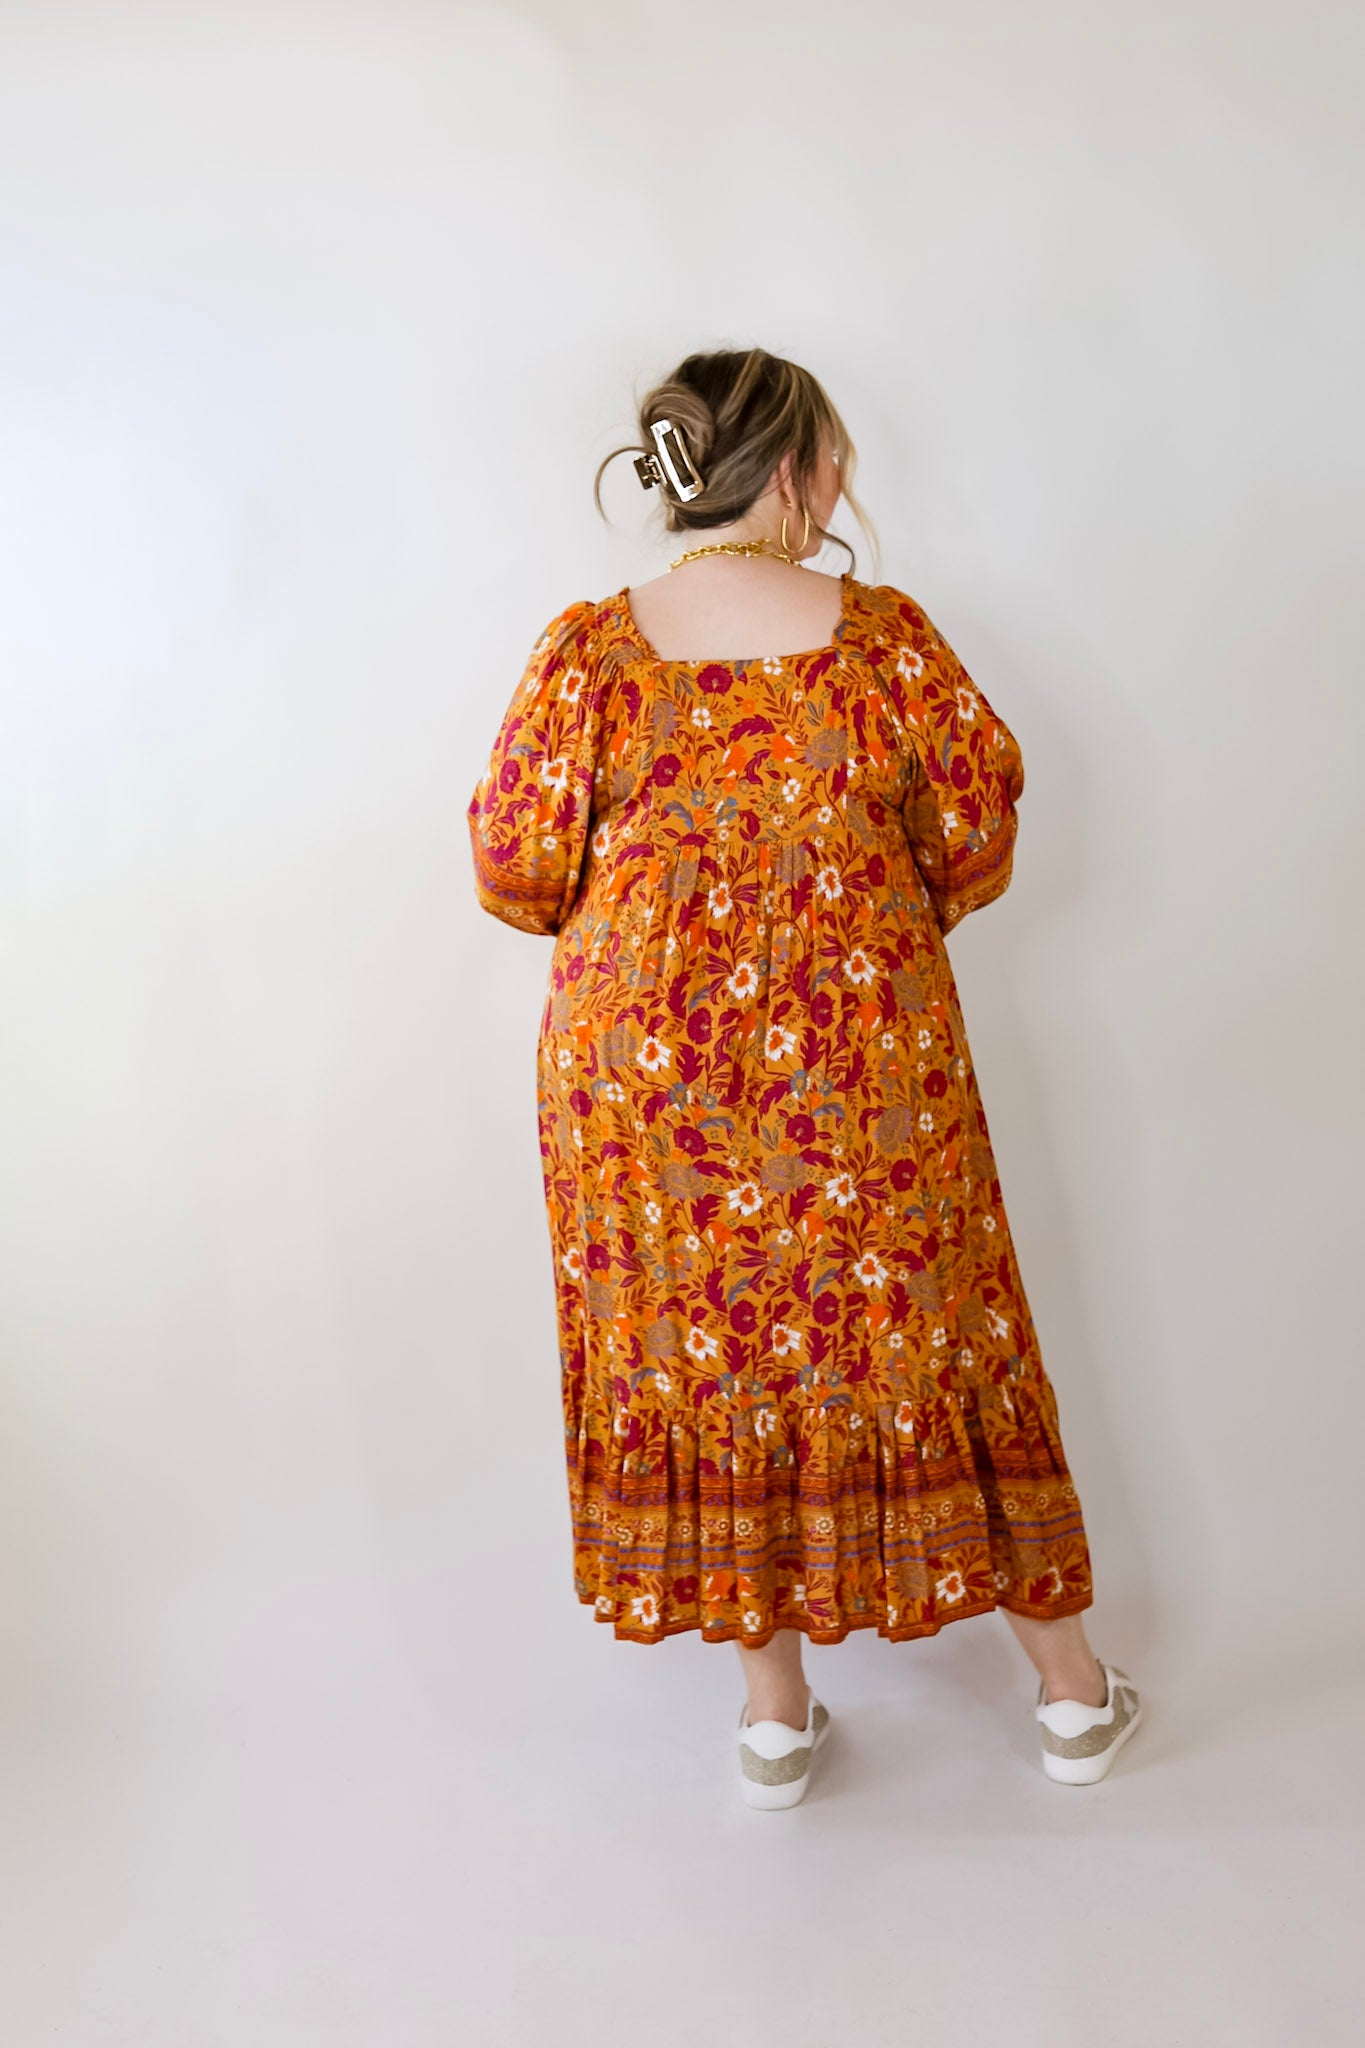 Autumn Daze Floral Print Square Neck Midi Dress in Mustard Yellow - Giddy Up Glamour Boutique